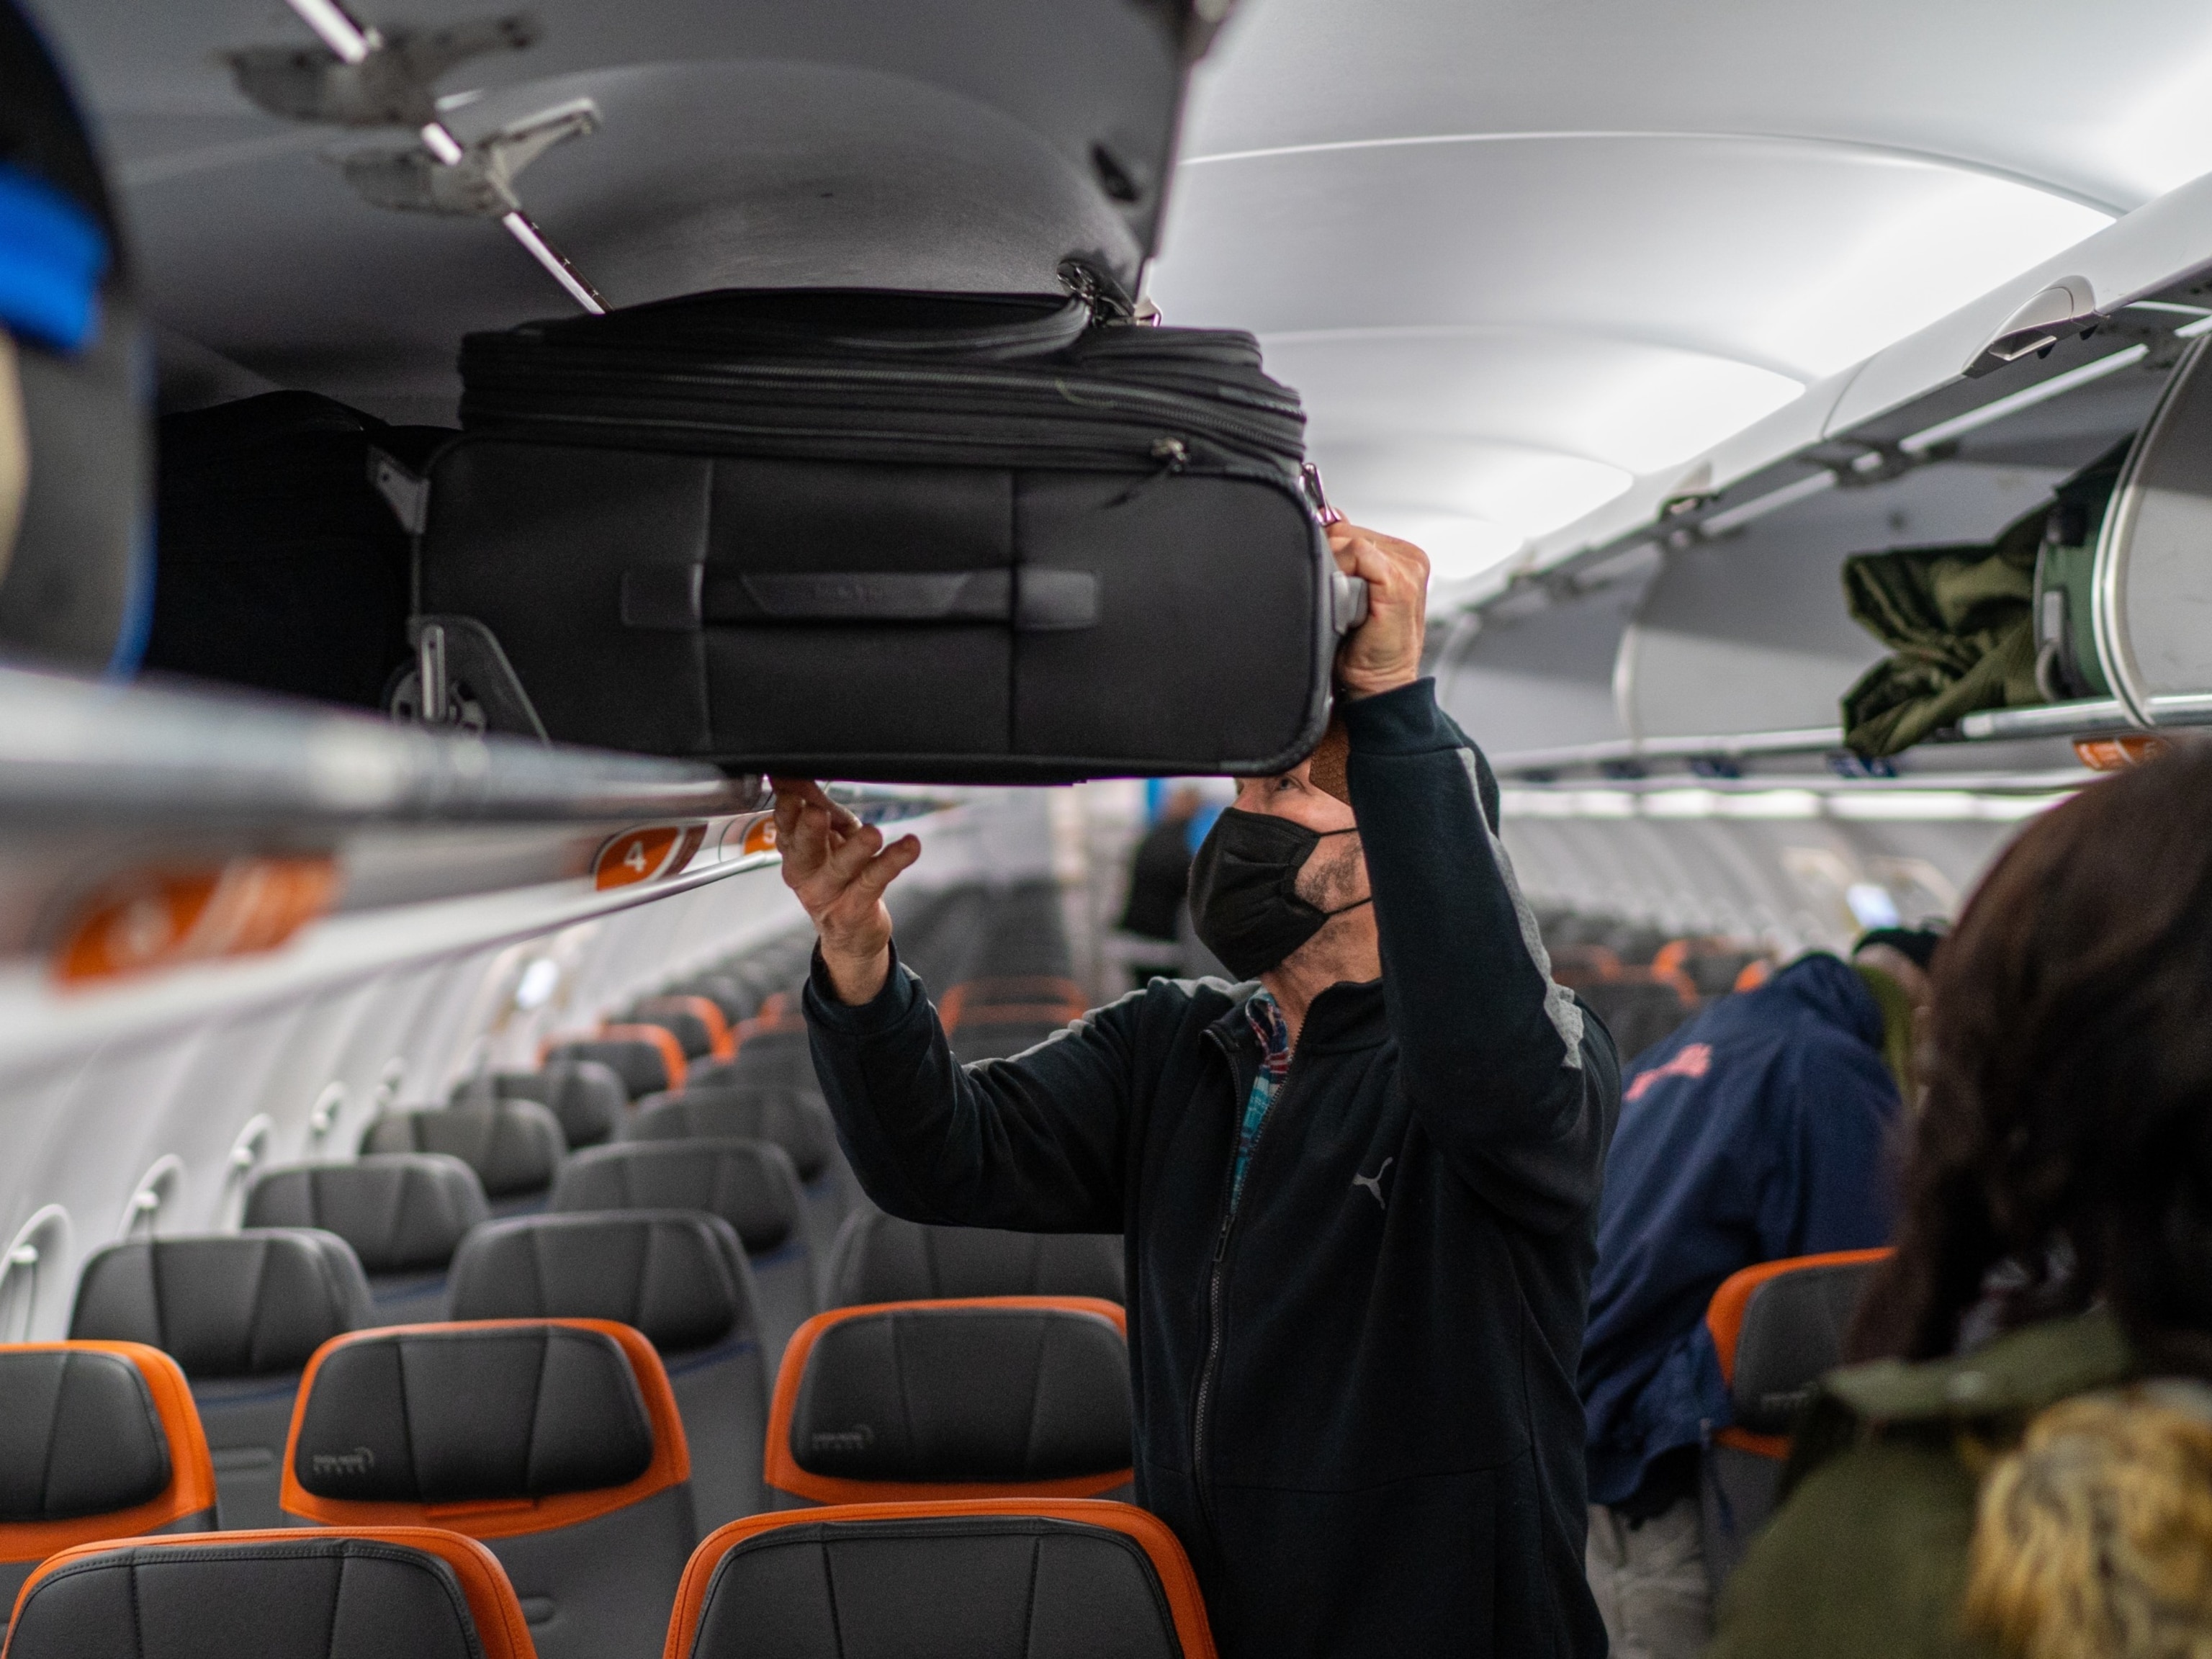 PHOTO: A JetBlue passenger puts his carry-on luggage into an overhead compartment January 28, 2022 at John F. Kennedy International Airport in New York City.